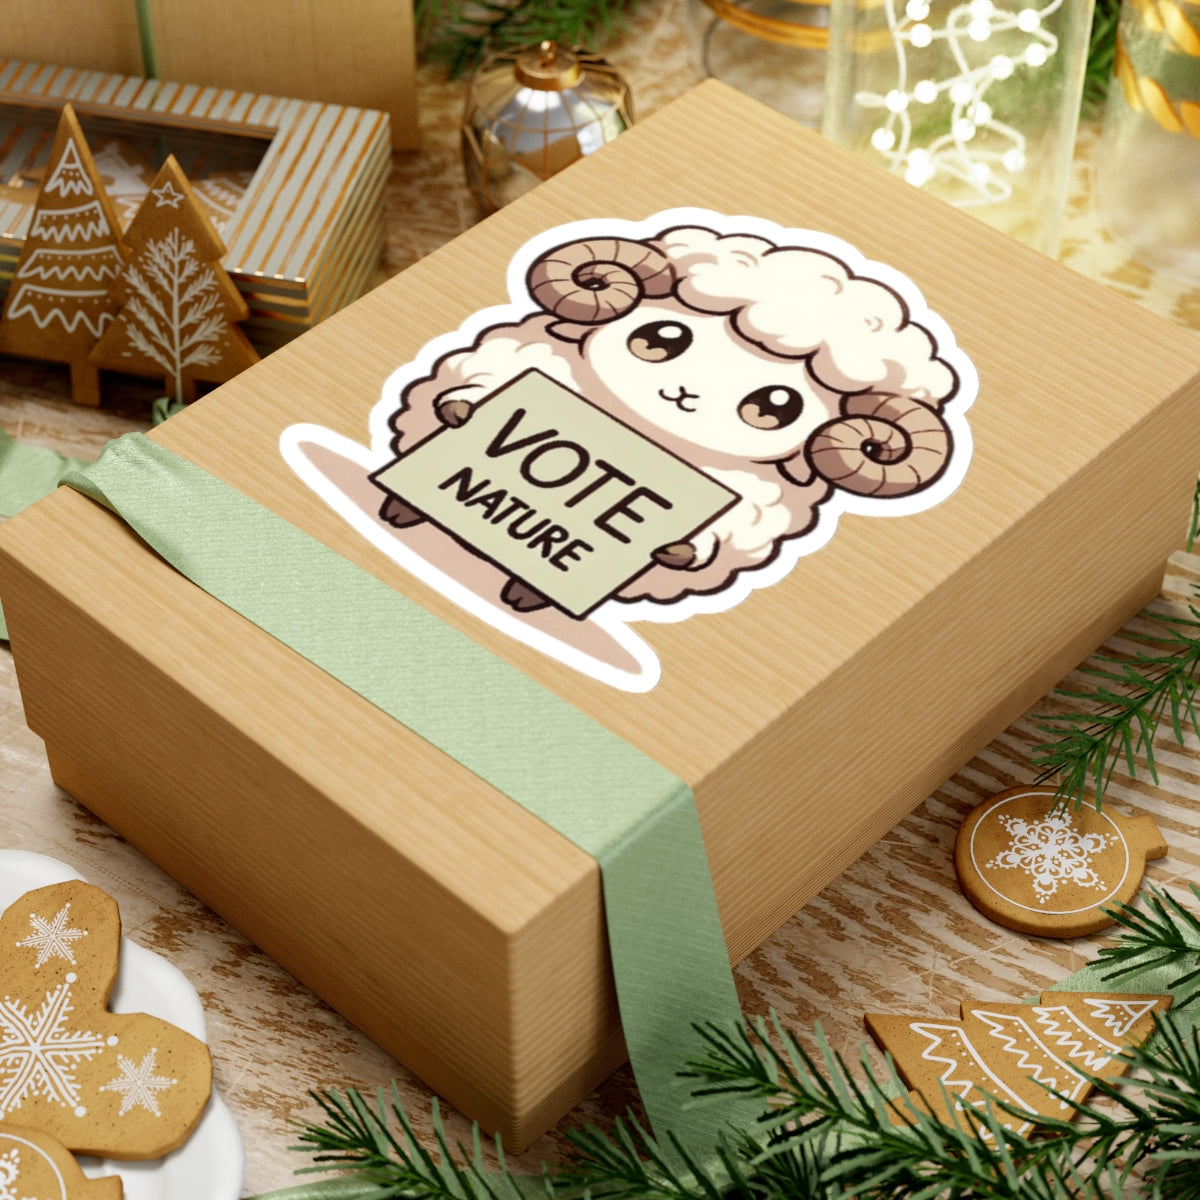 Inspirational Cute Ram Statement vinyl Sticker: Vote Nature! for laptop, kindle, phone, ipad, instrument case, notebook, mood board, or wall